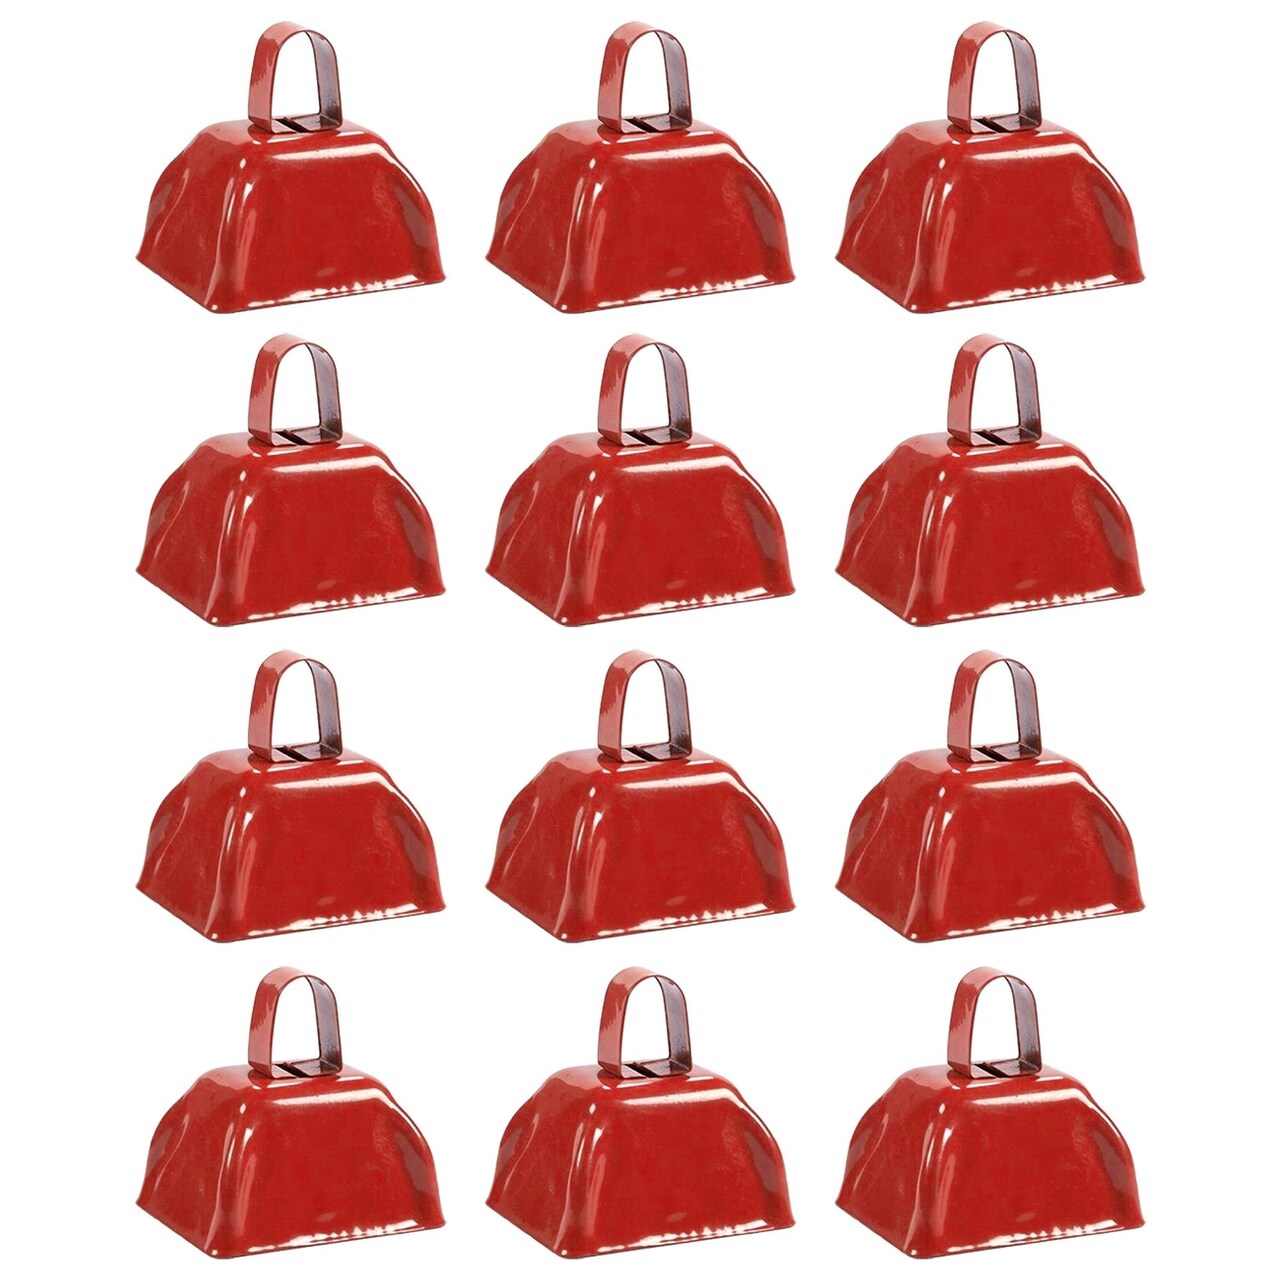 12 Pack Red Cow Bells Noise Makers with Handle, Hand Percussion Cowbells  for Sporting Events, Football Games, Graduation Ceremonies, Welcome Parties  (3 x 3 Inches)